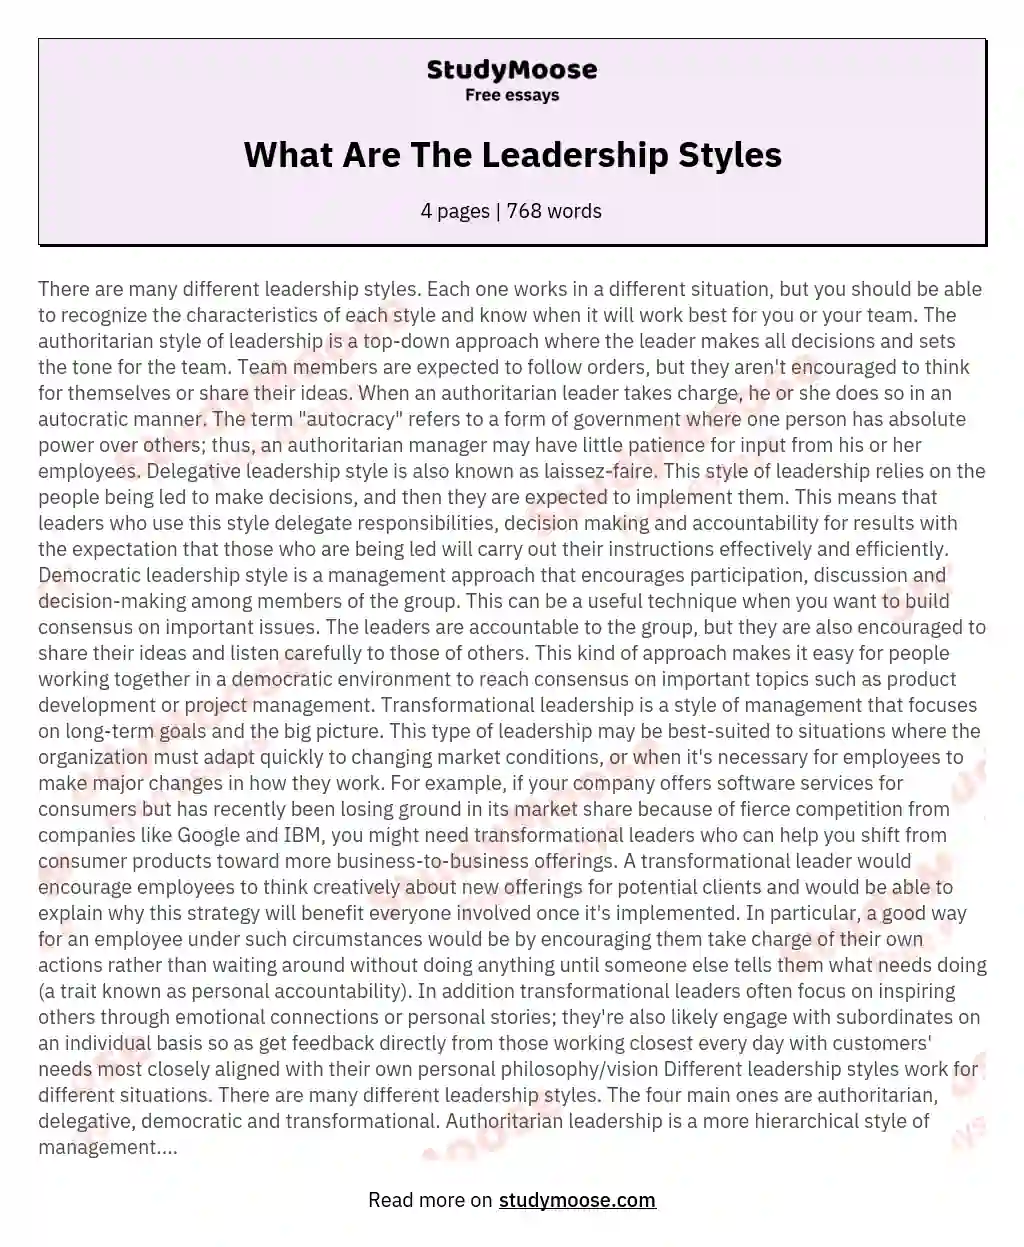 What Are The Leadership Styles essay